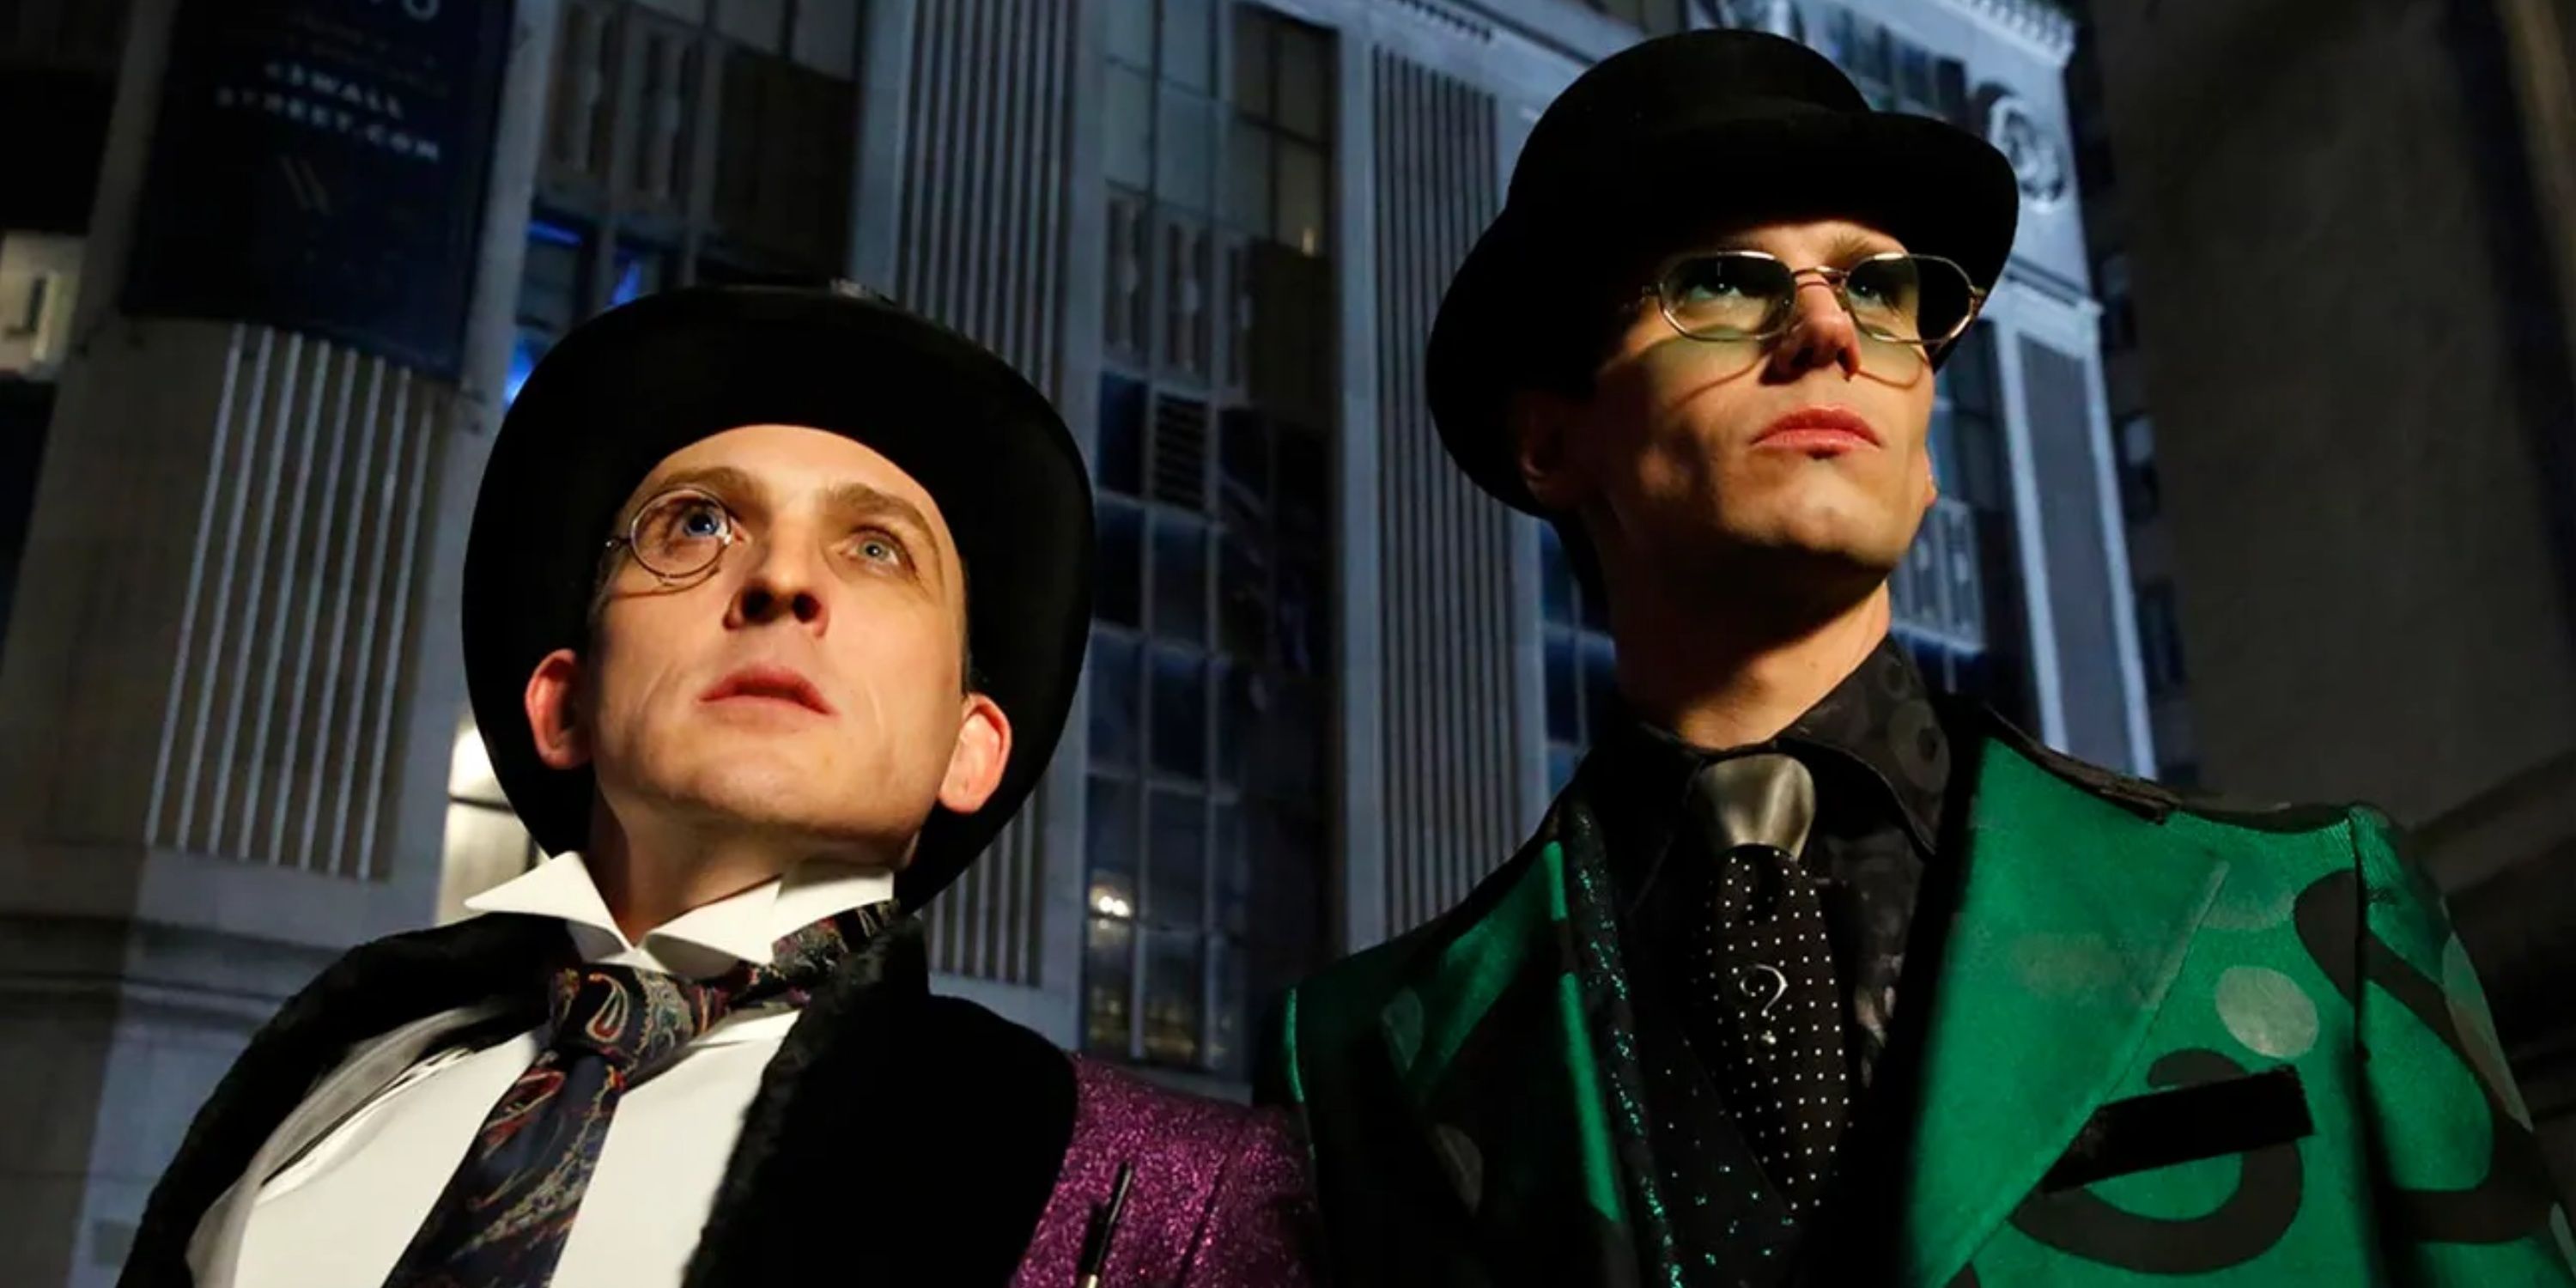 The Penguin and the Riddler watch worriedly in Gotham